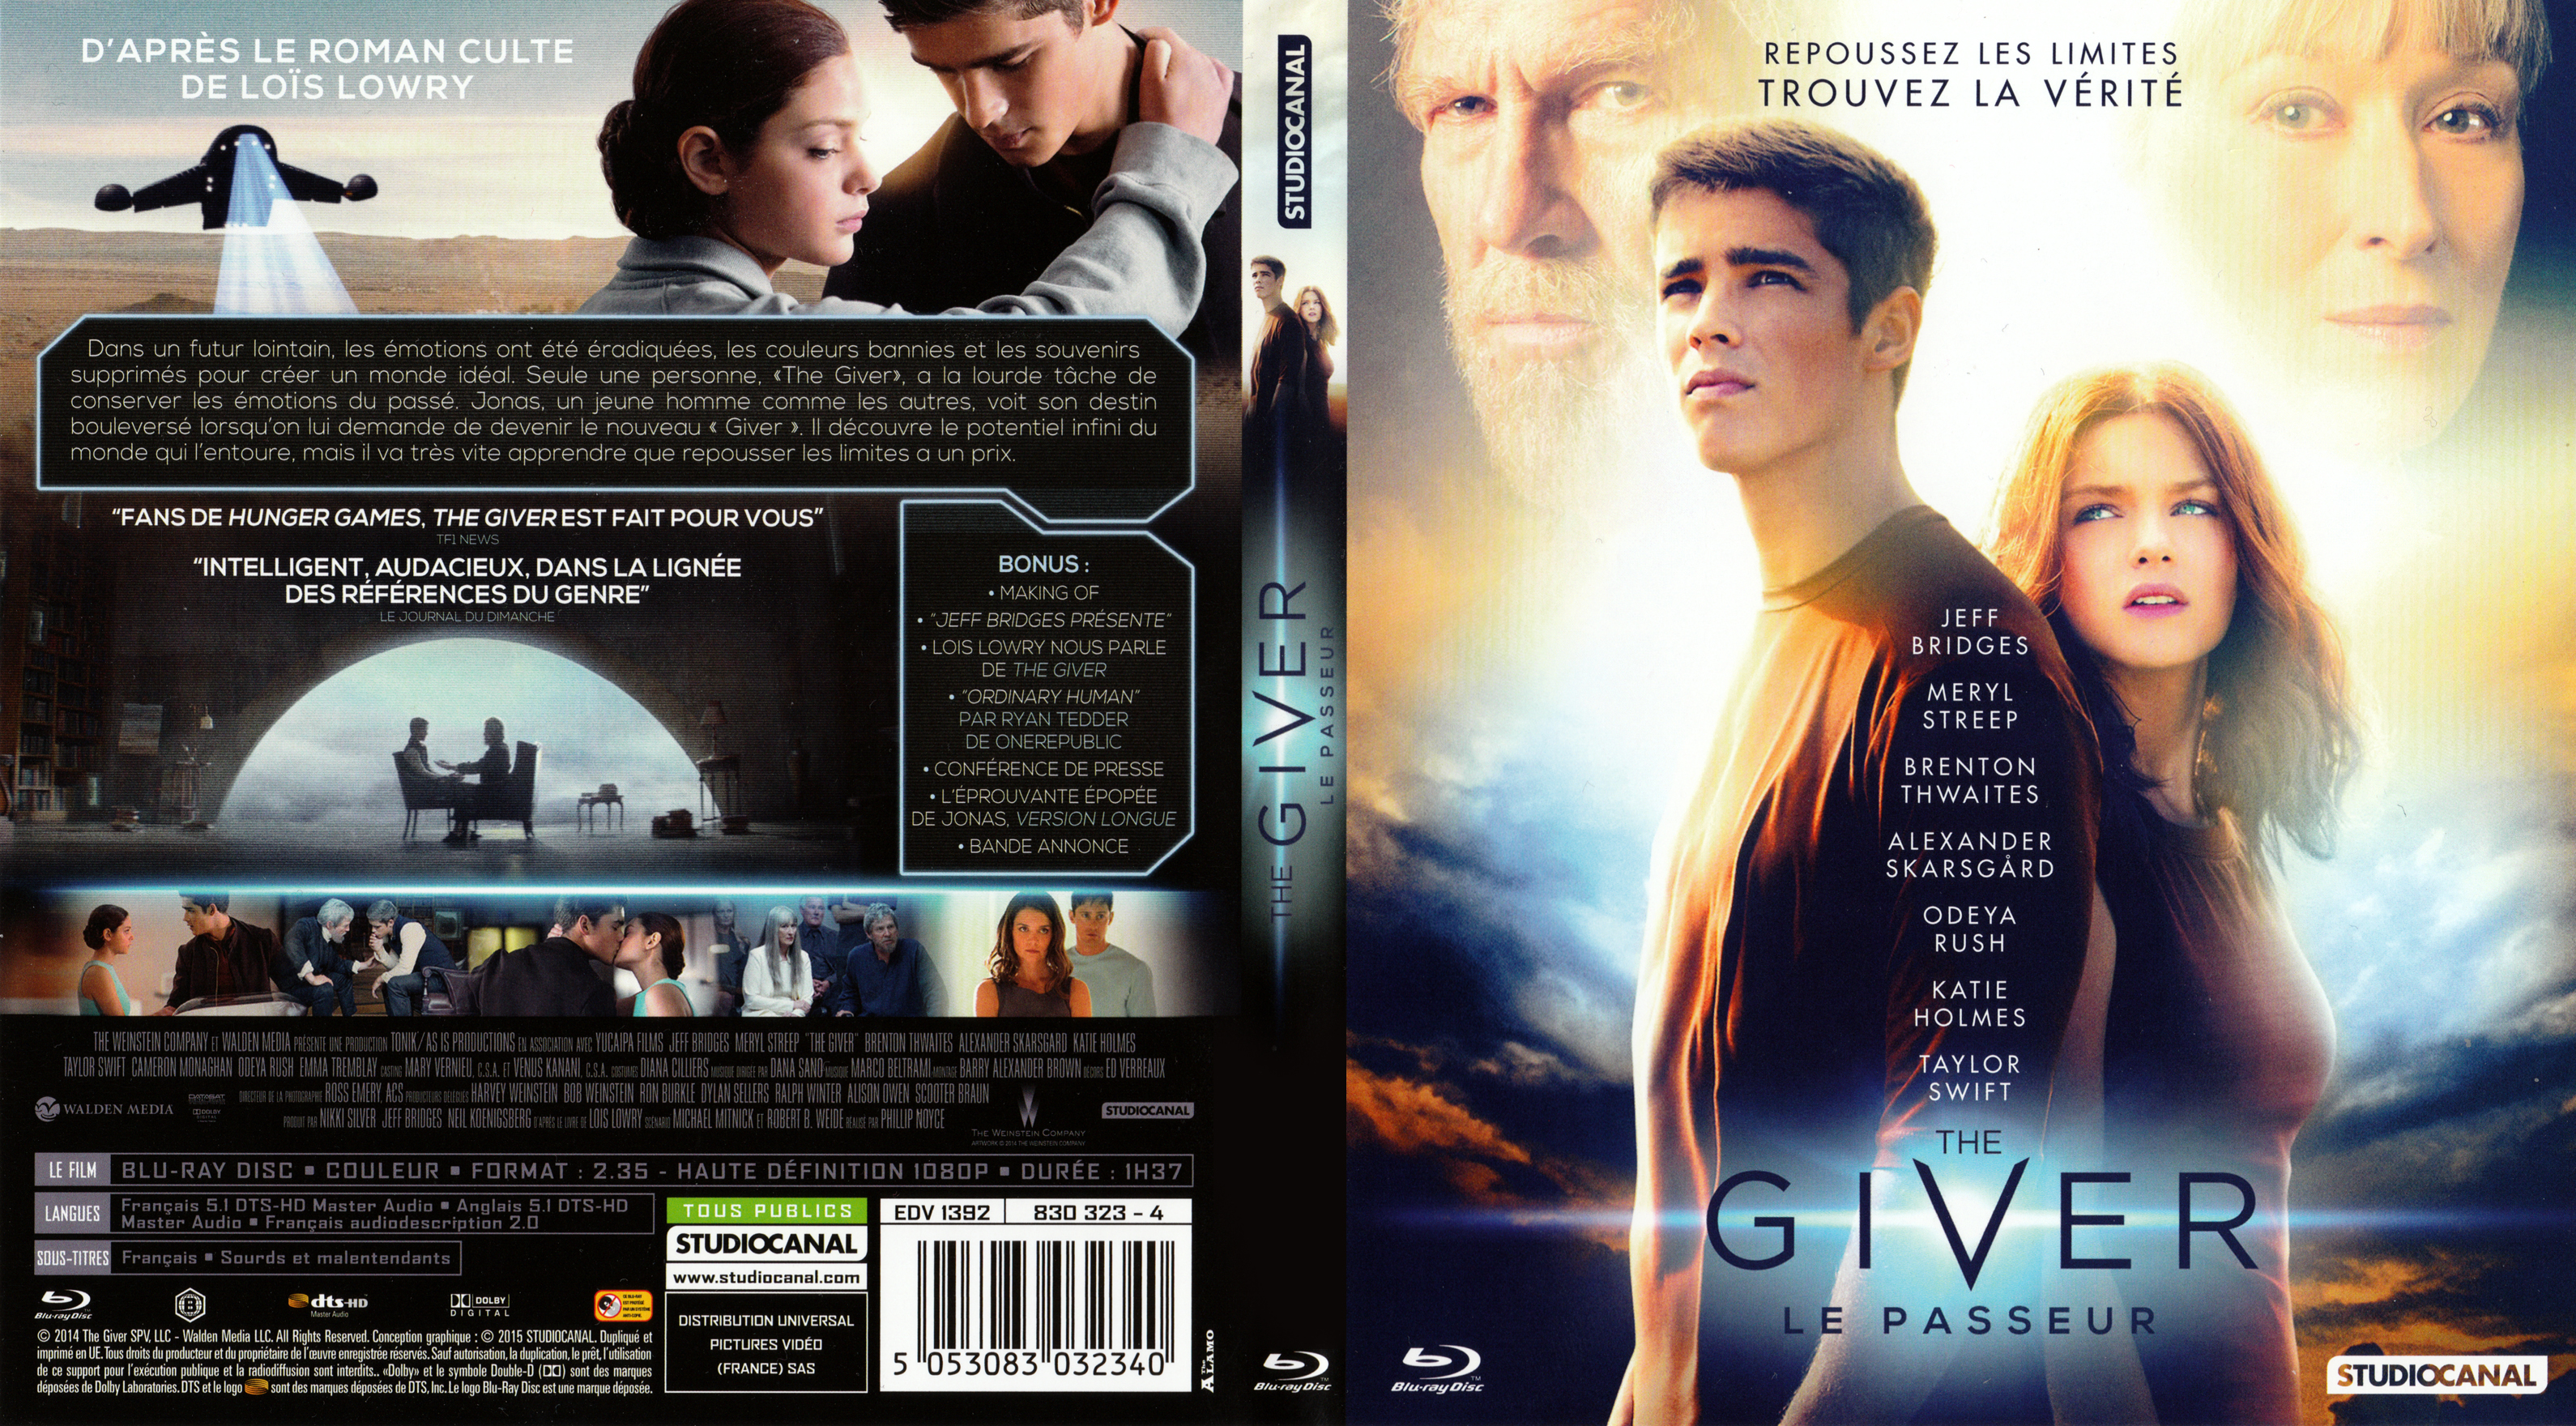 Jaquette DVD The giver (BLU-RAY)